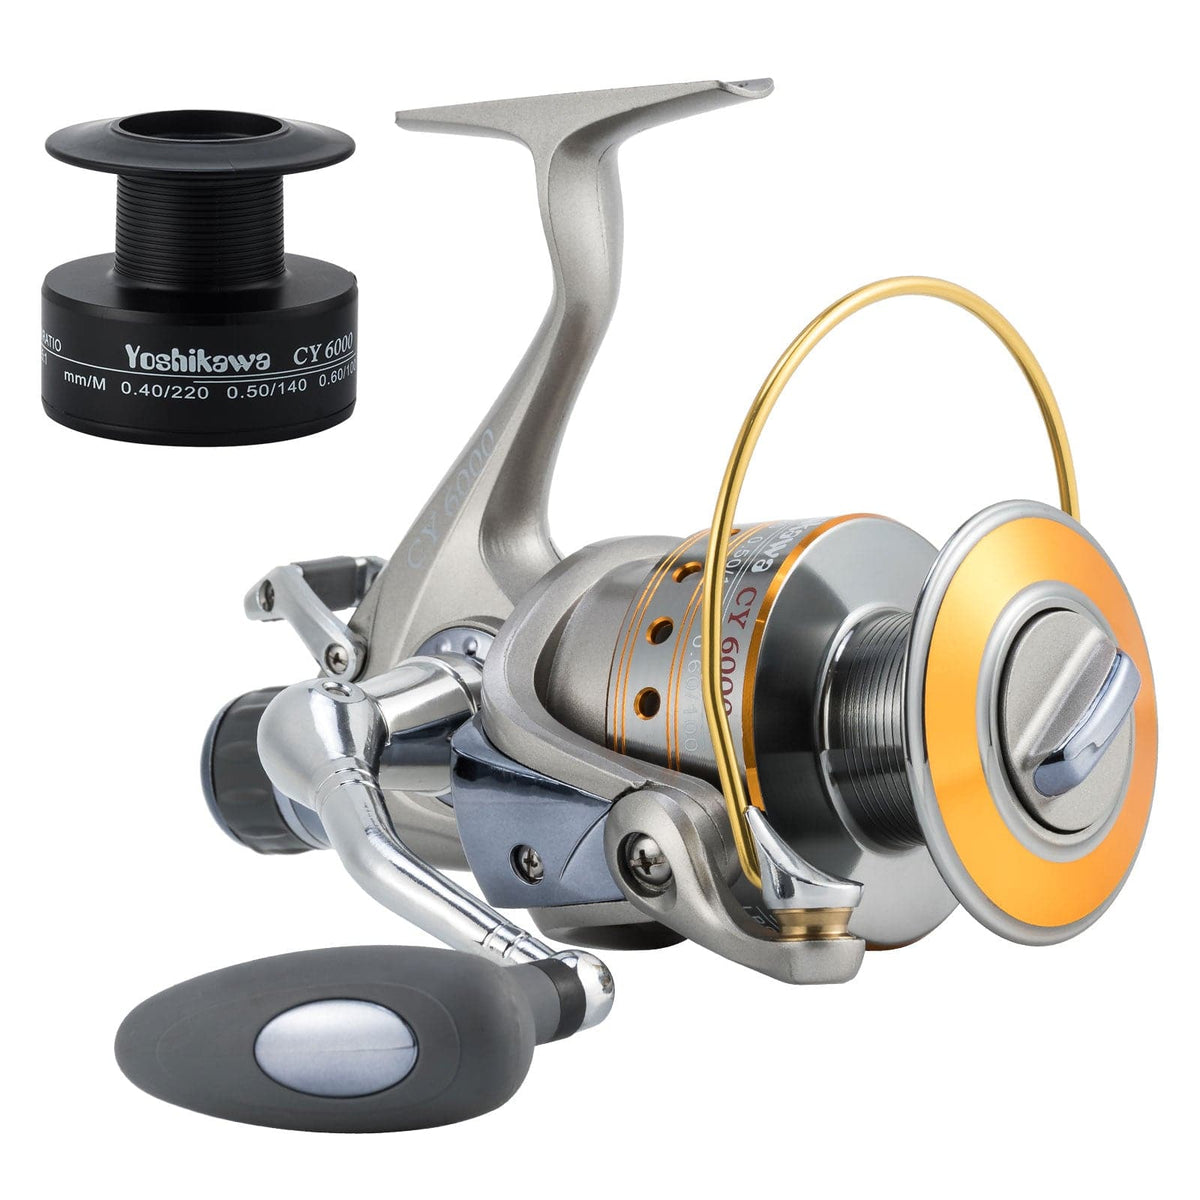 FA1000 Open Face Spinning Fishing Reel - Sirius Survival